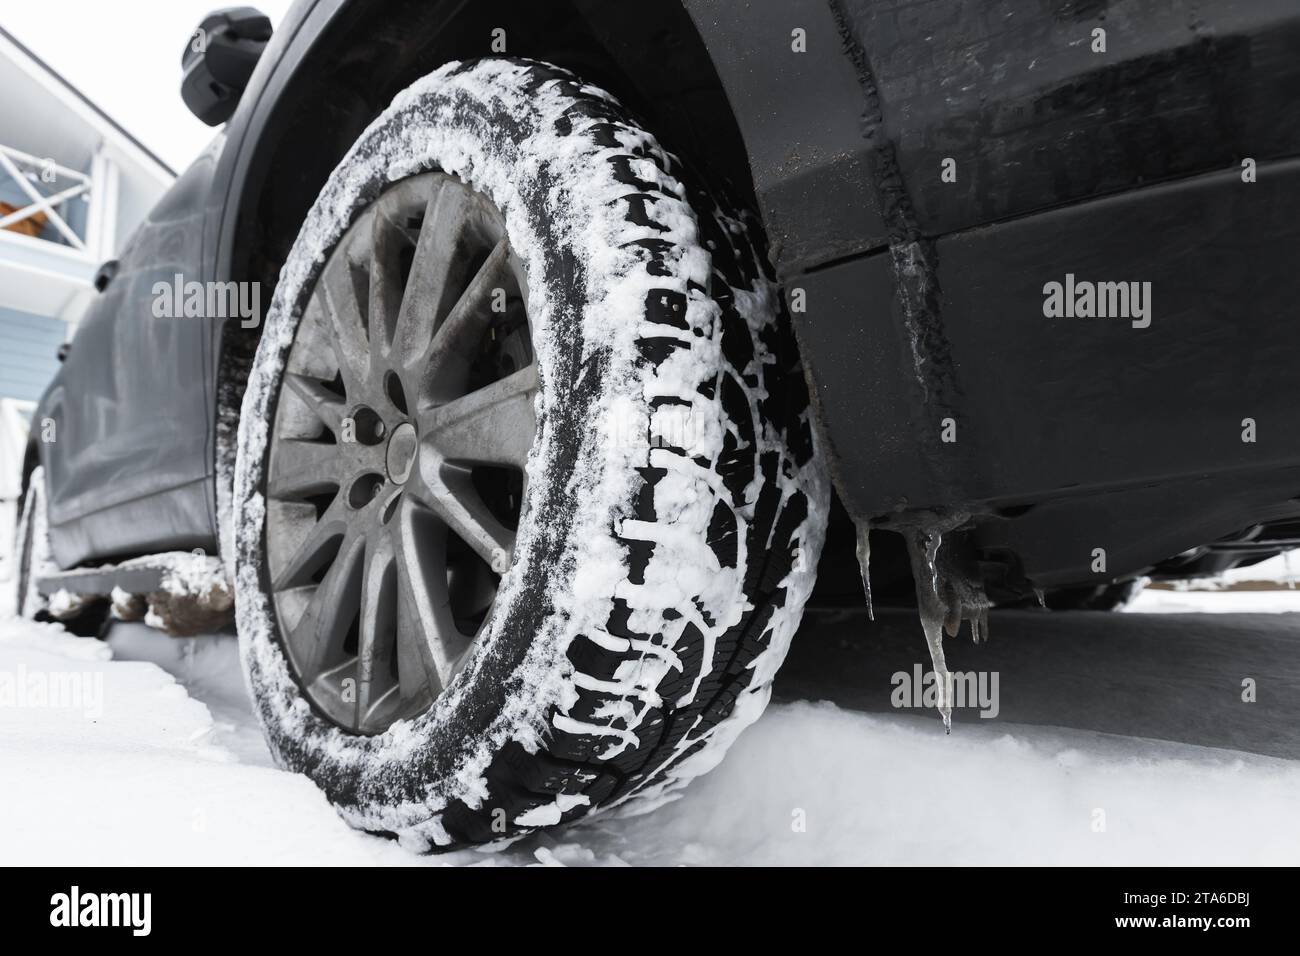 Close-up photo of a SUV car wheel on snow tire with metal studs Stock Photo